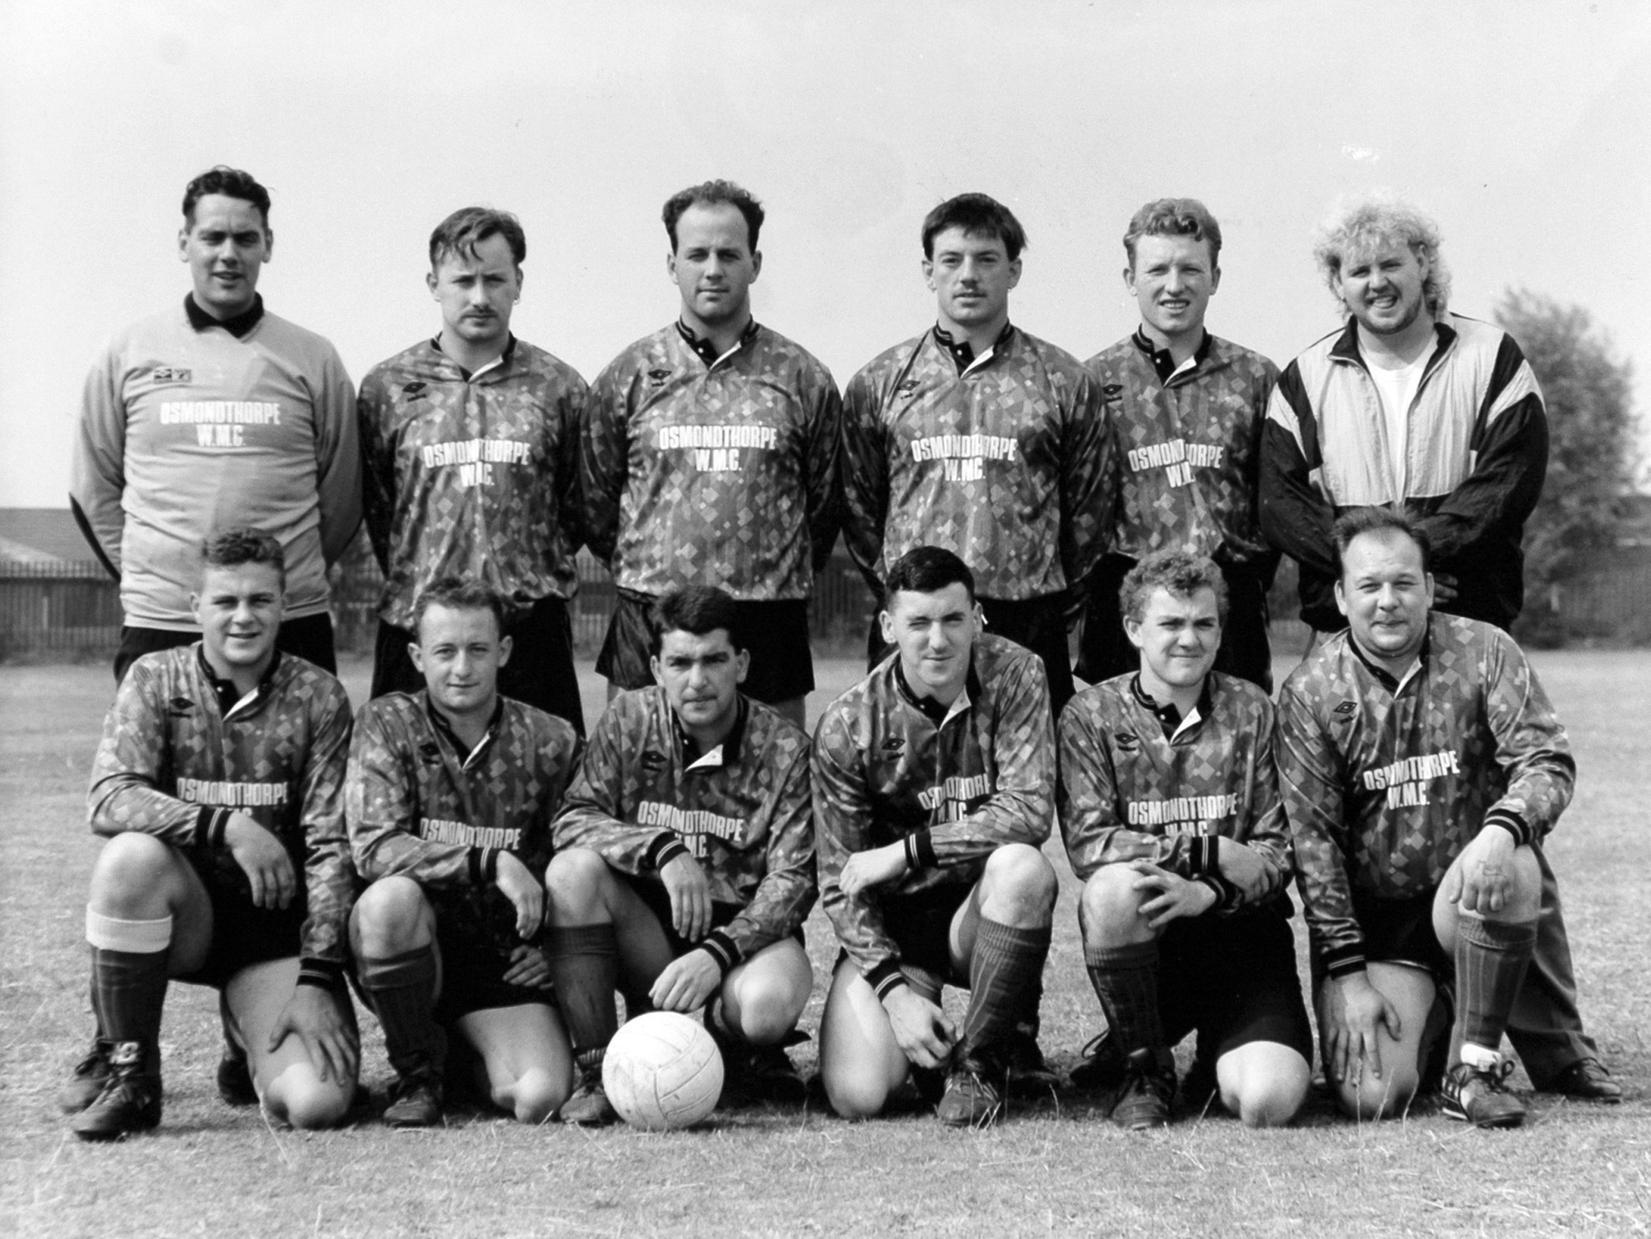 Back row, from left: Stuart Glossop, Andy White, Mick Roberts, Dale Mitchell, Kevin Roebuck, Tony Keating (manager). Front: Steve Phillips, John Packer, Kevin Harrison, Darren Sebine, Mark Graves and Mark Linley.